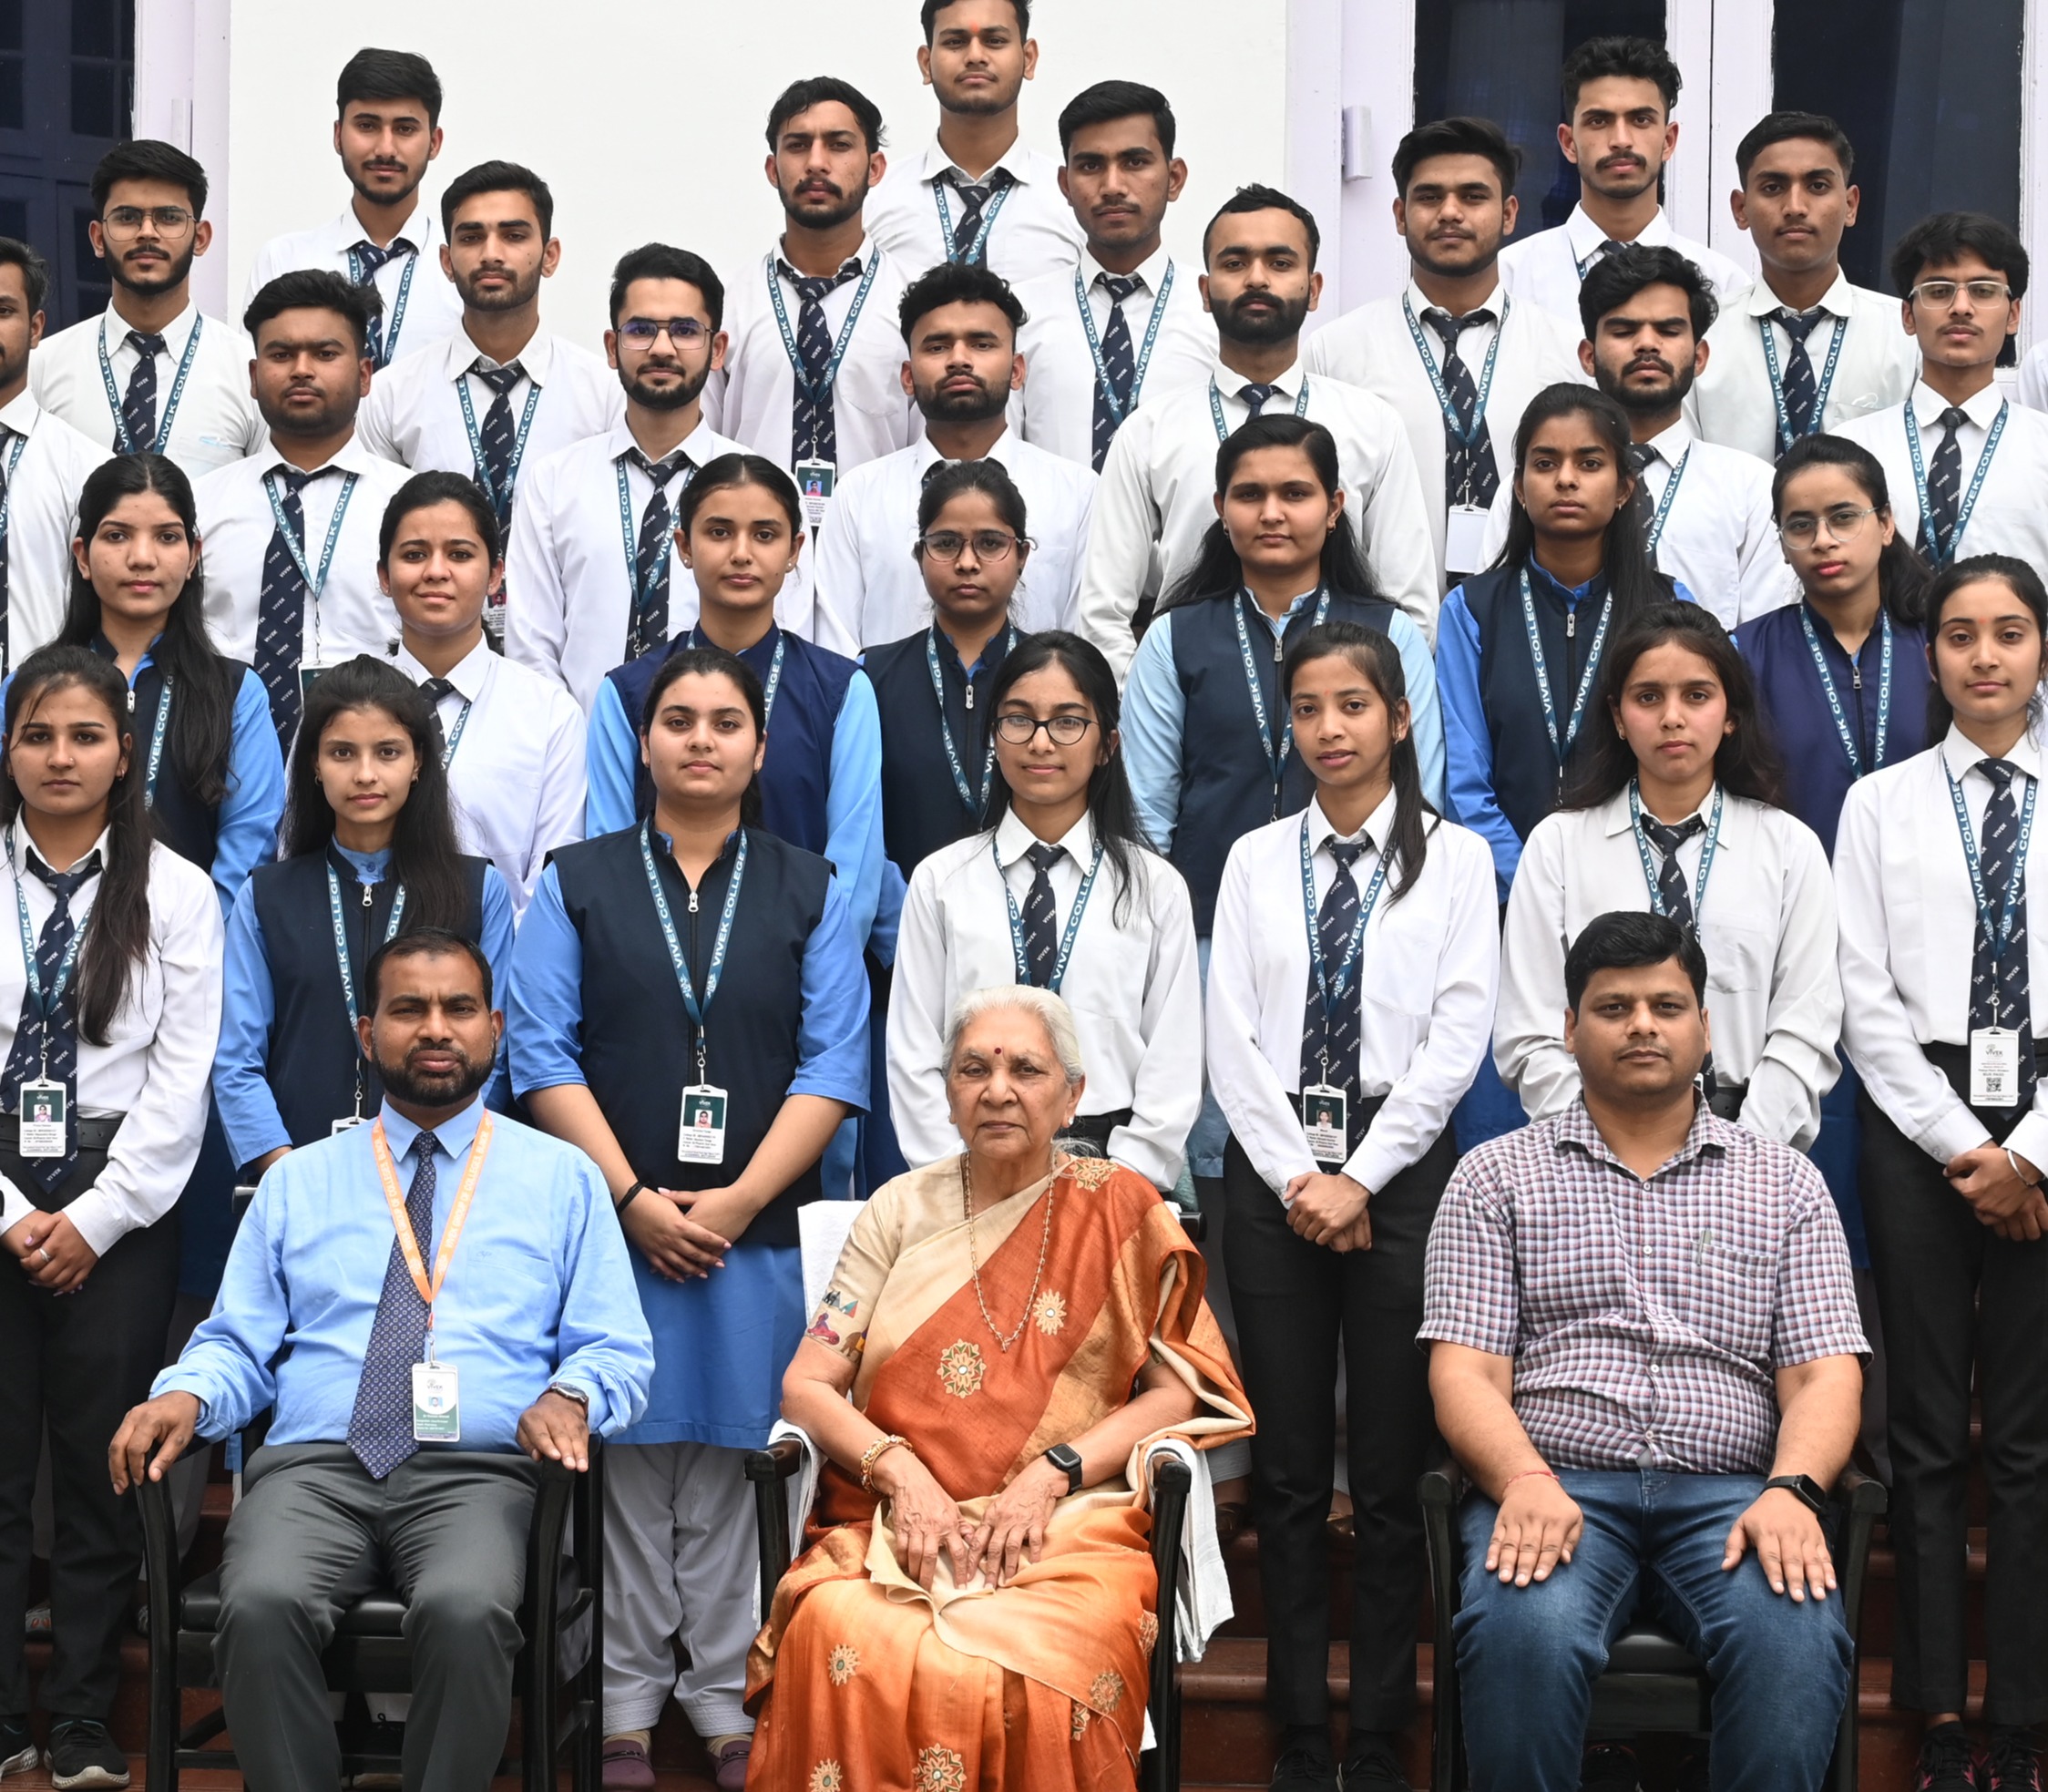 Students from Bijnor met the Governor